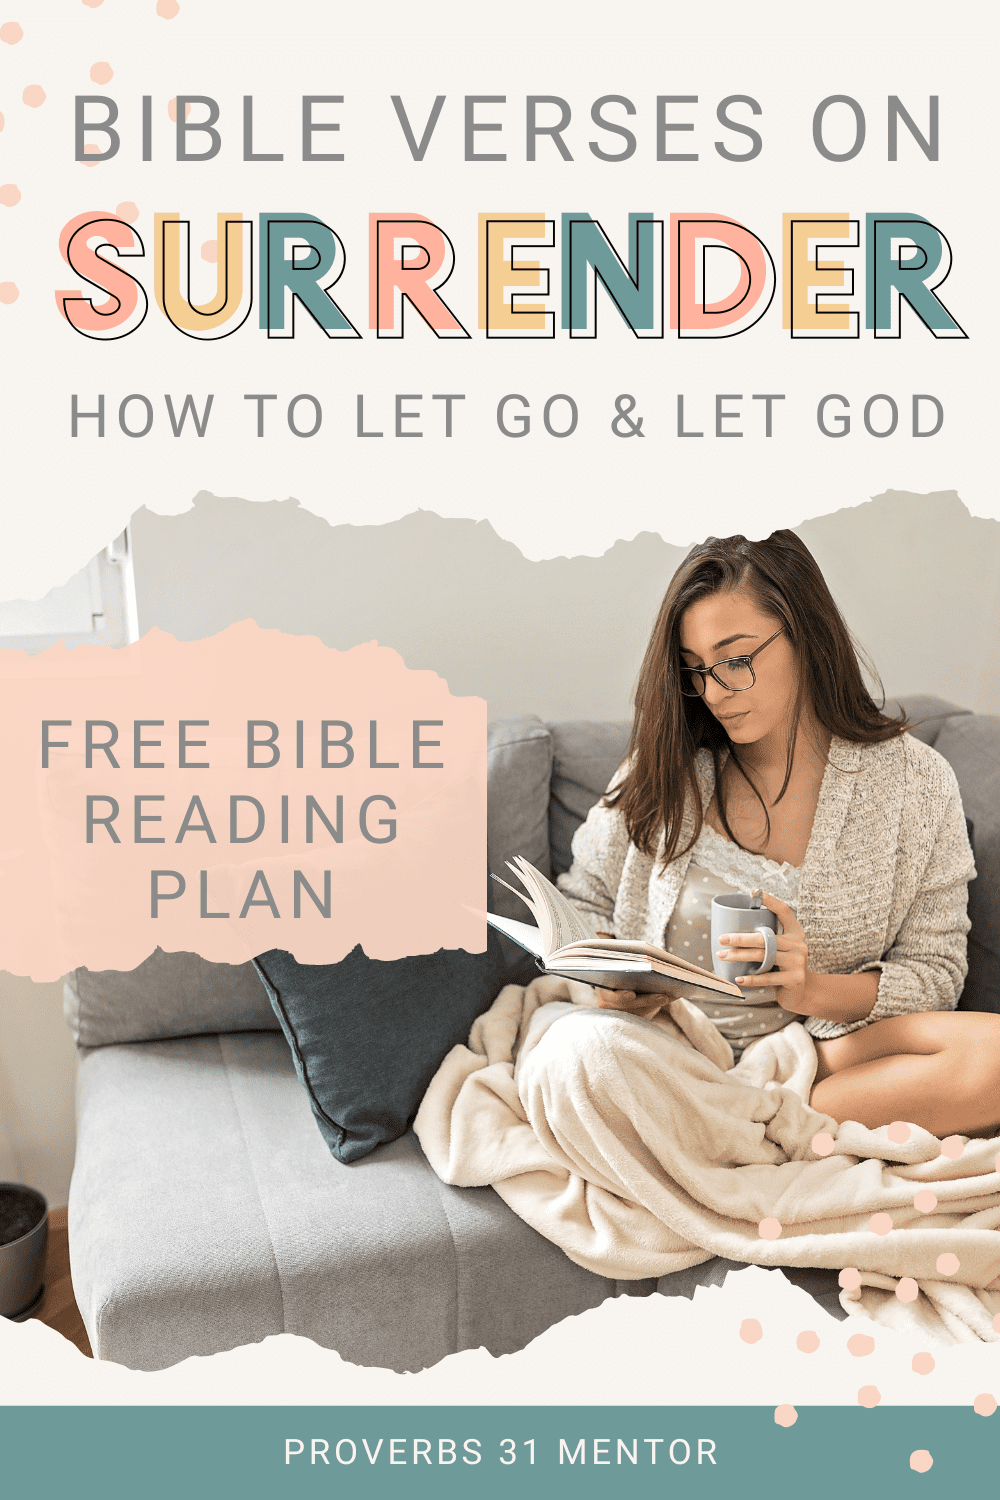 Title- Bible verses about surrender picture- woman reading with coffee